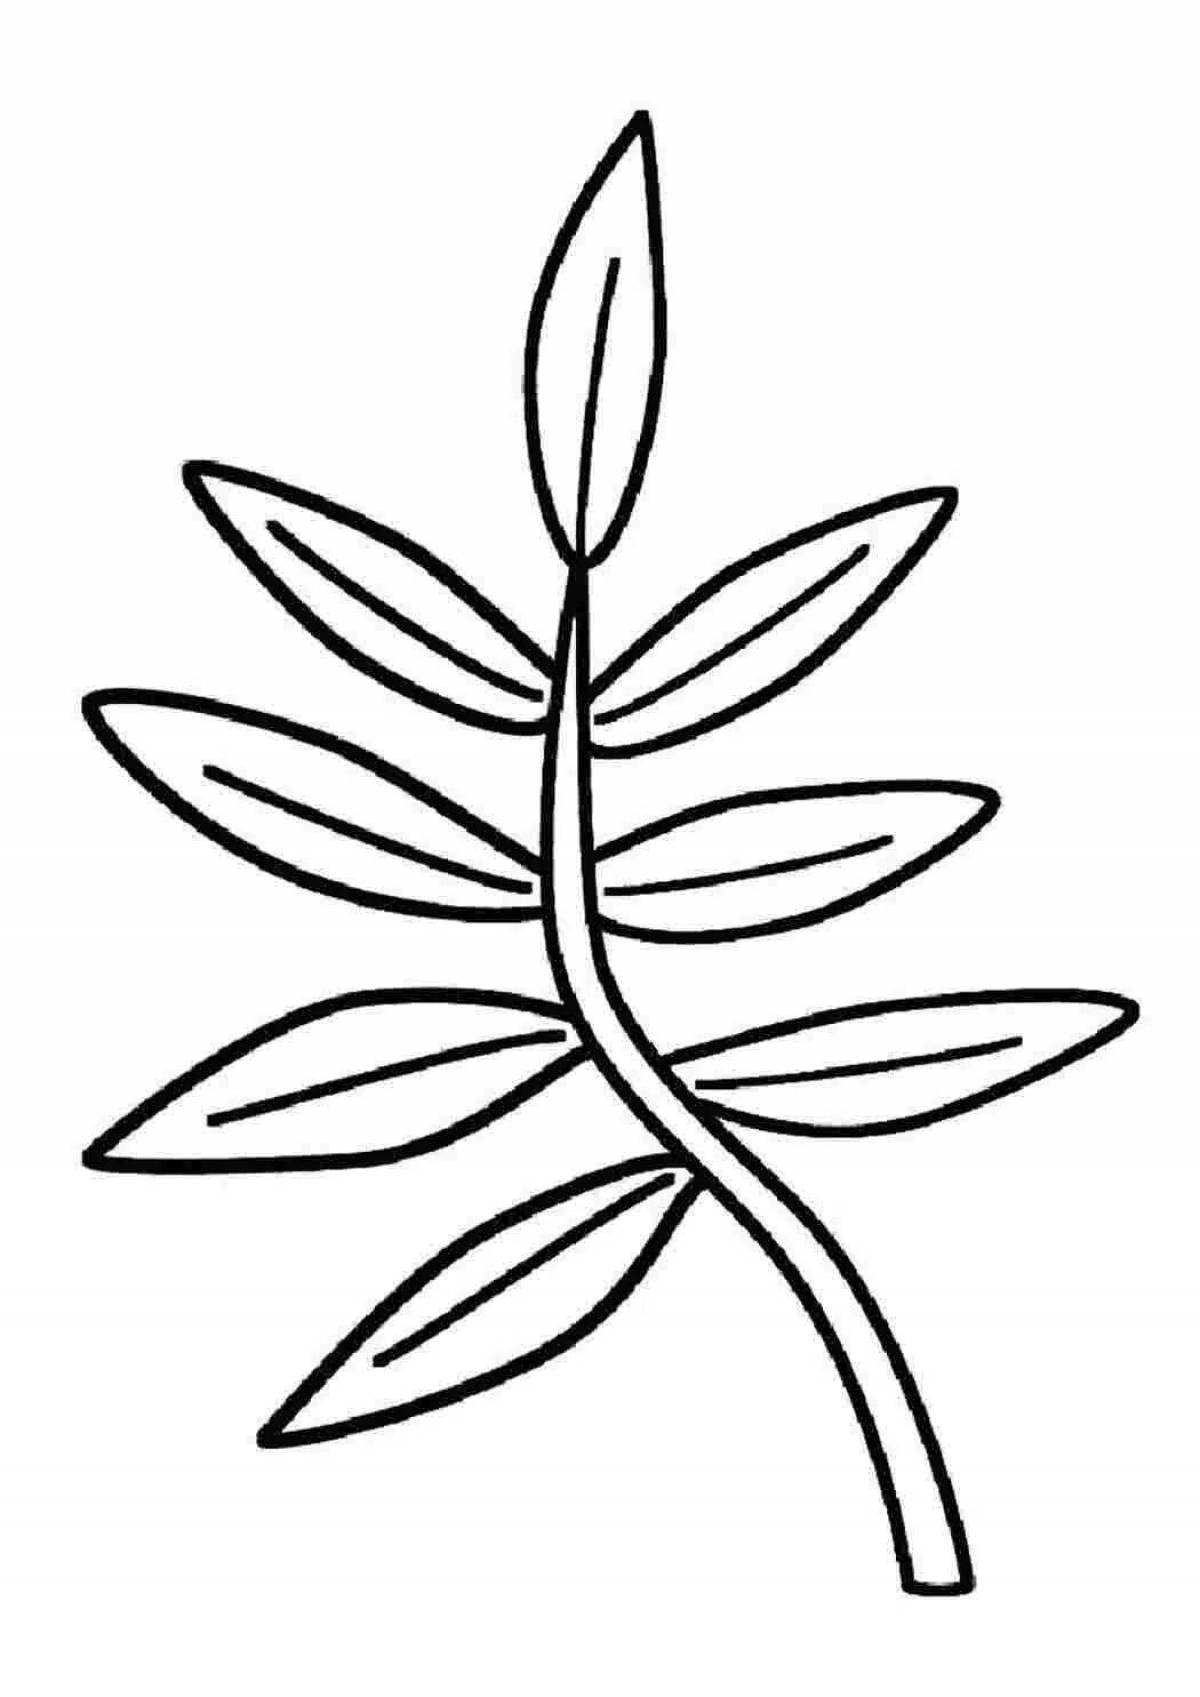 Playful stem coloring page